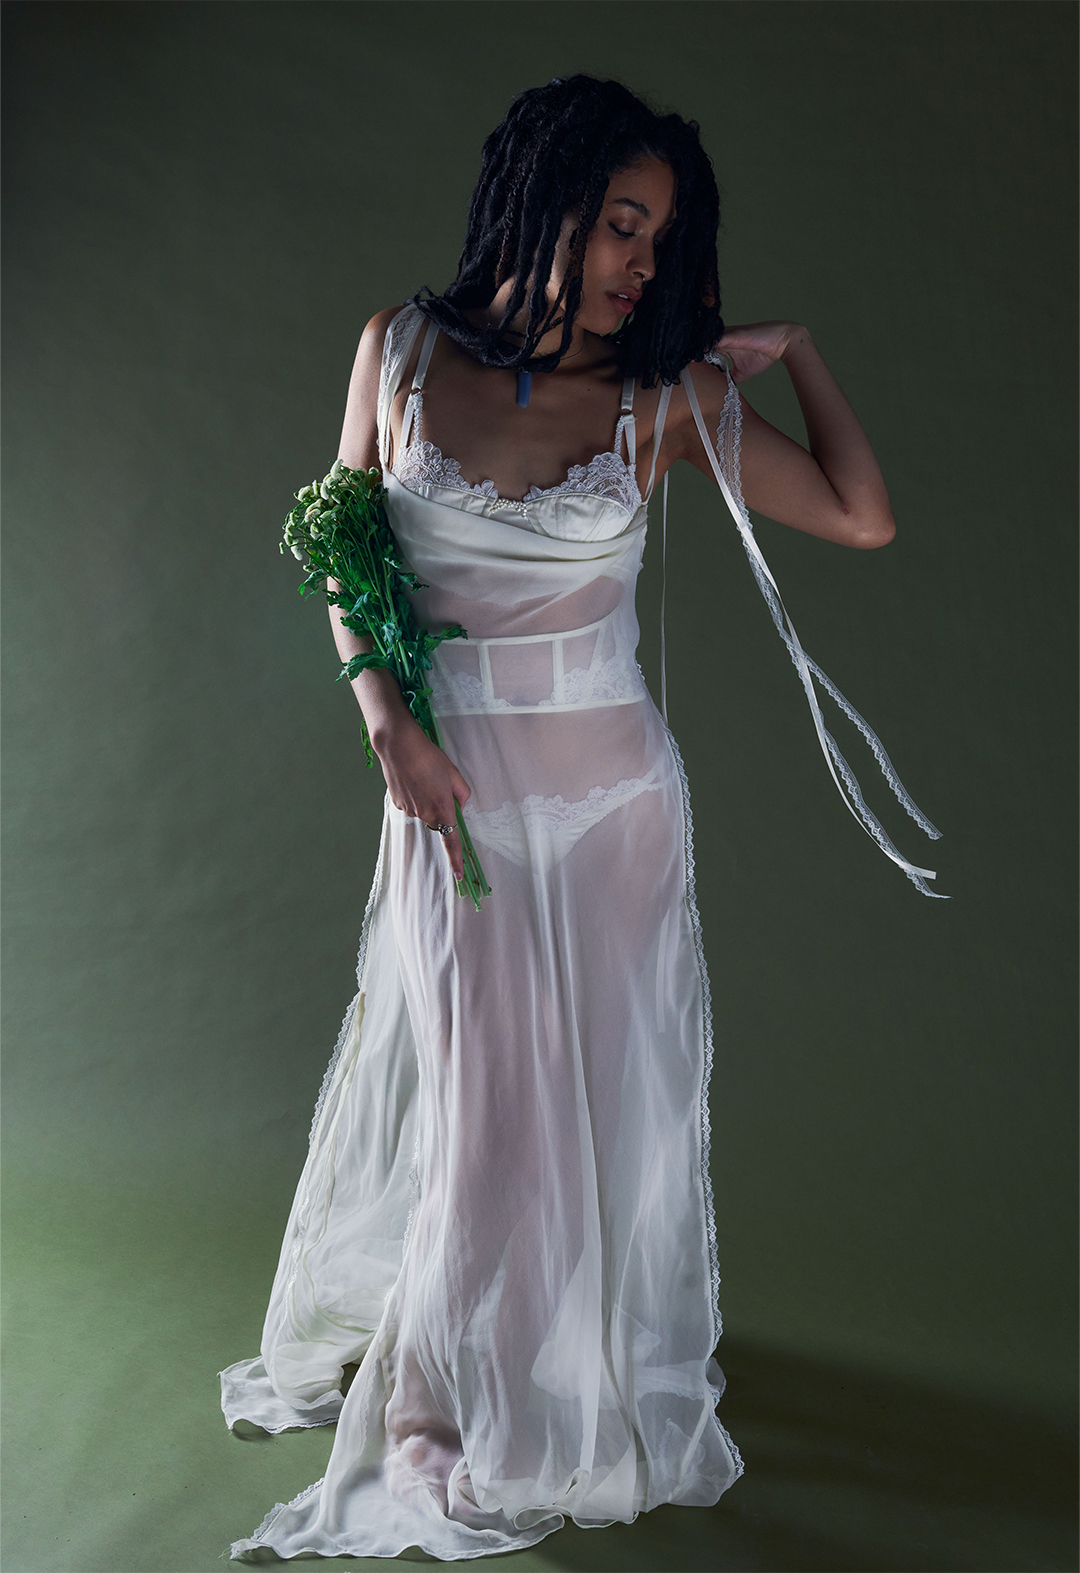 This image features a model in a long pearl-white bias gown with a cowl neck, open side seams and lace detailing. It is paired with a bra and panty set and matching waist corset, embellished with lace and pearls. The image is set in a green background.